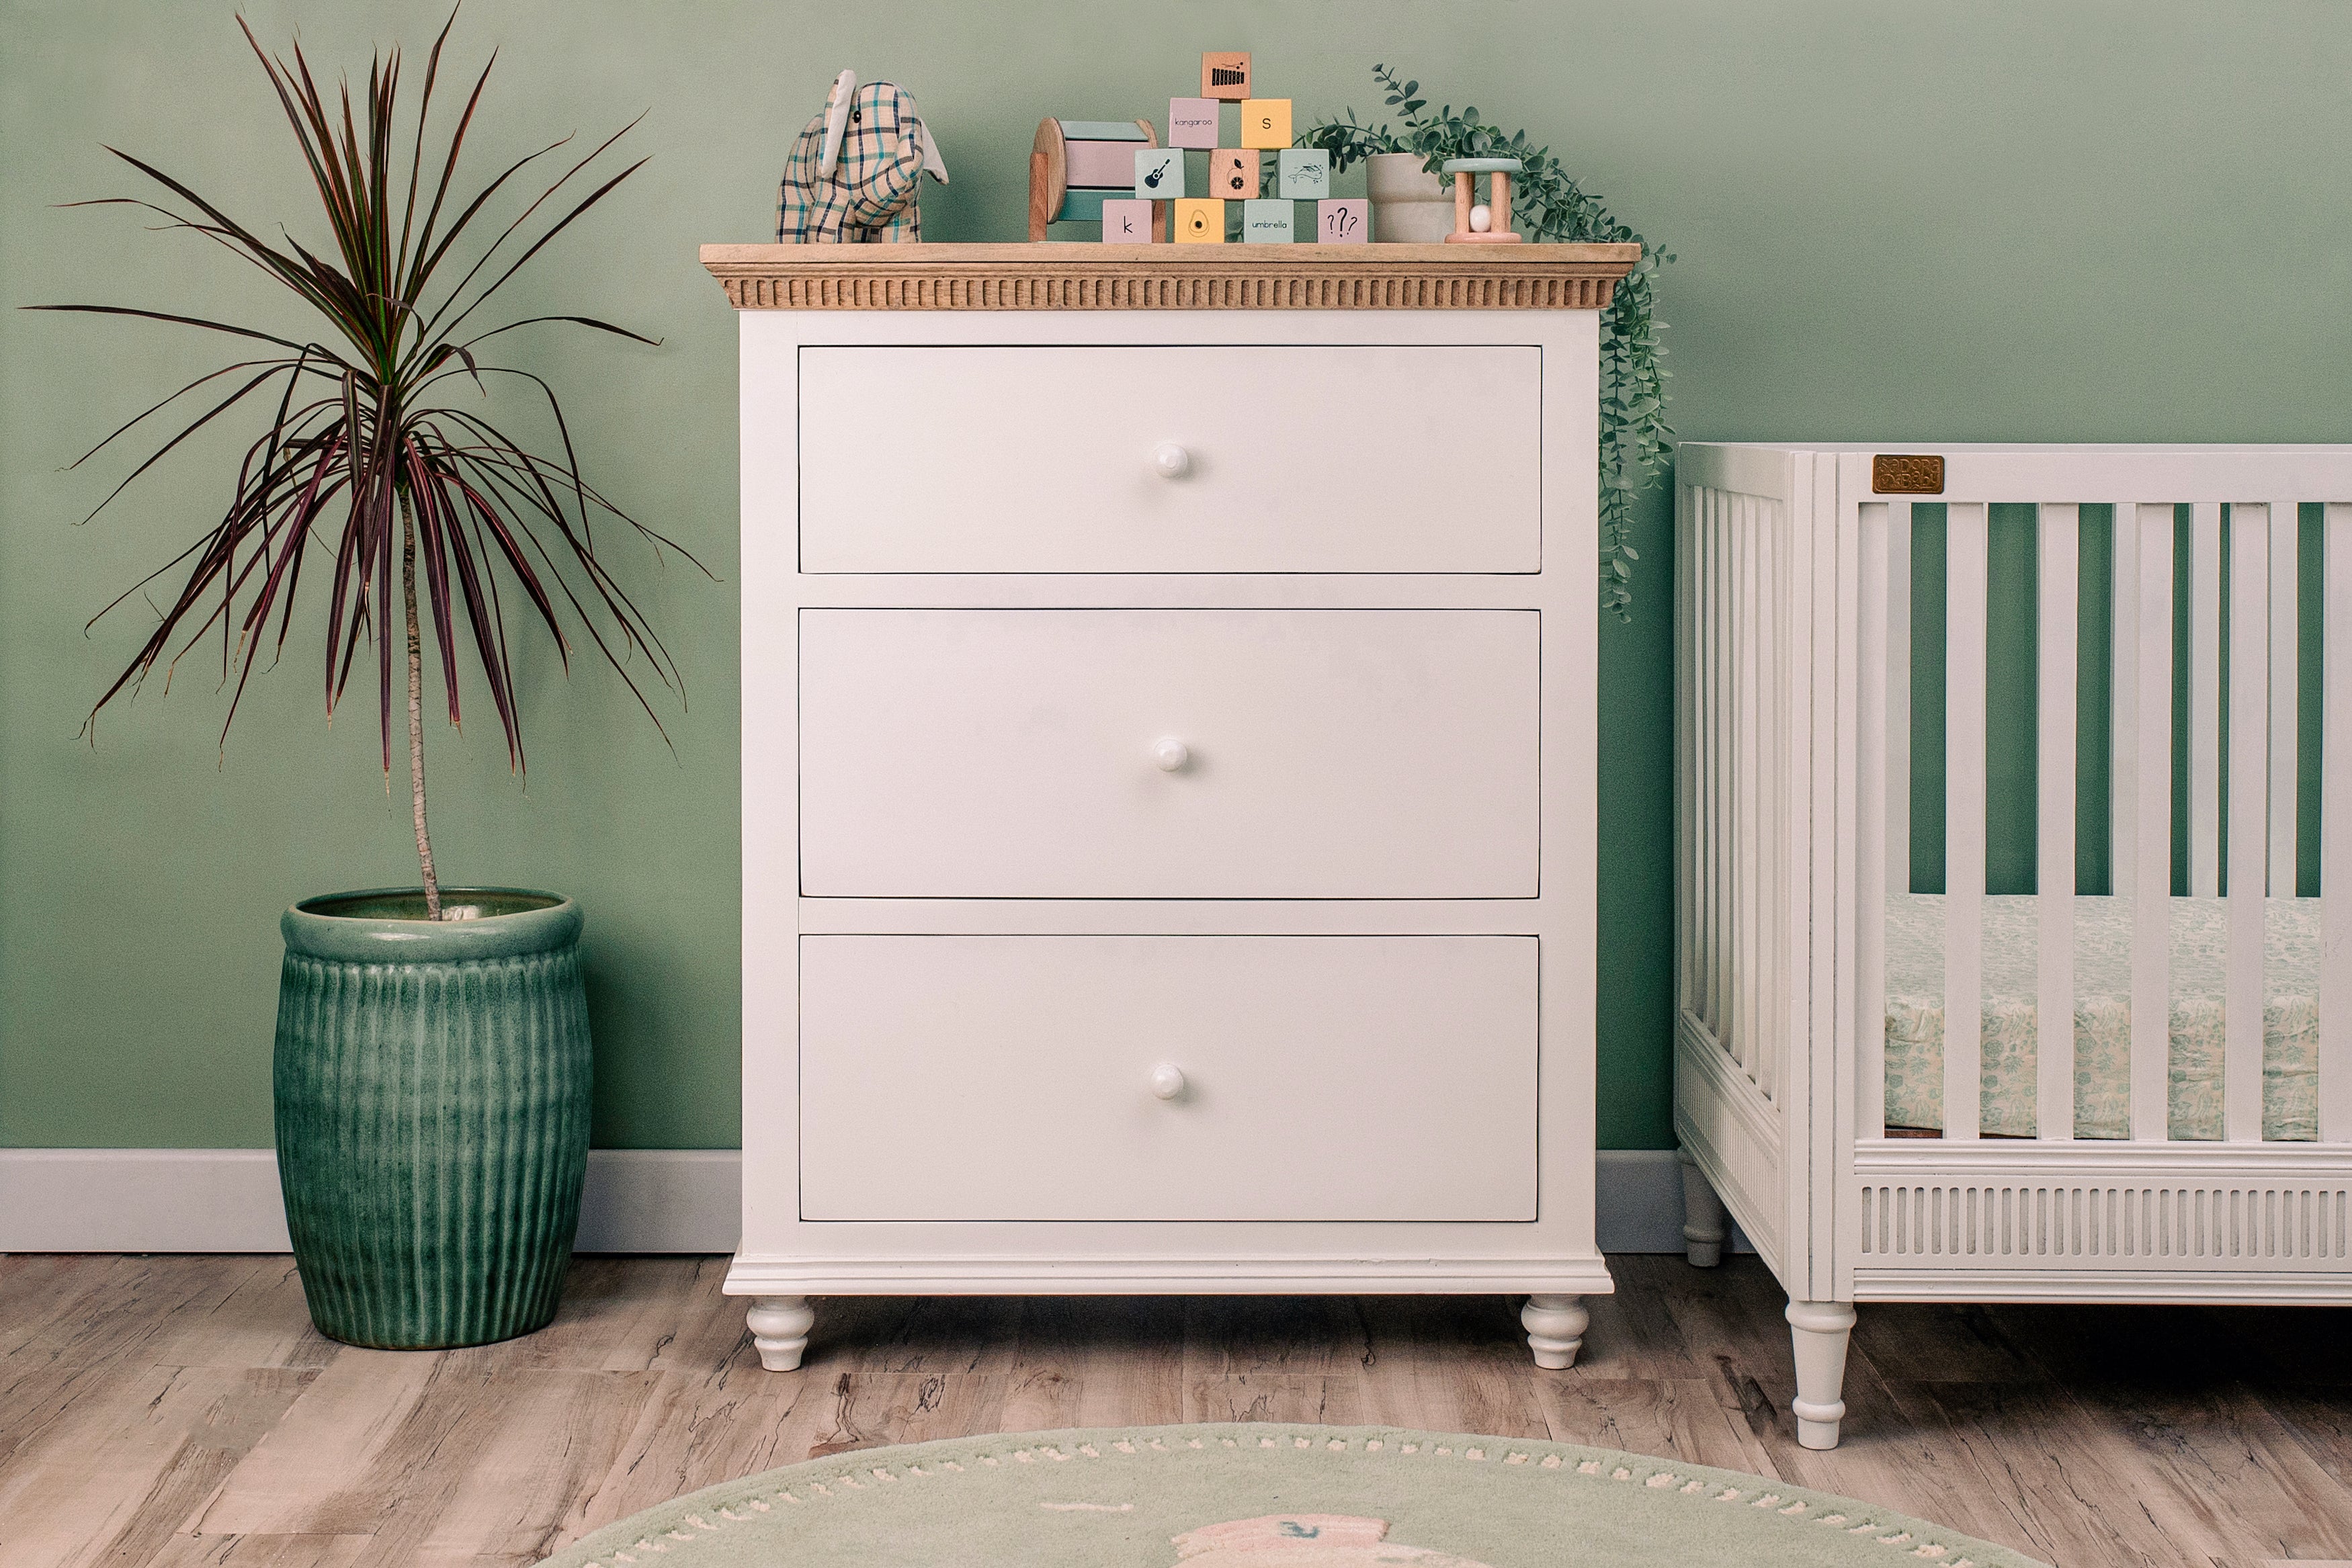 Chest of 3 Drawers - White Duco